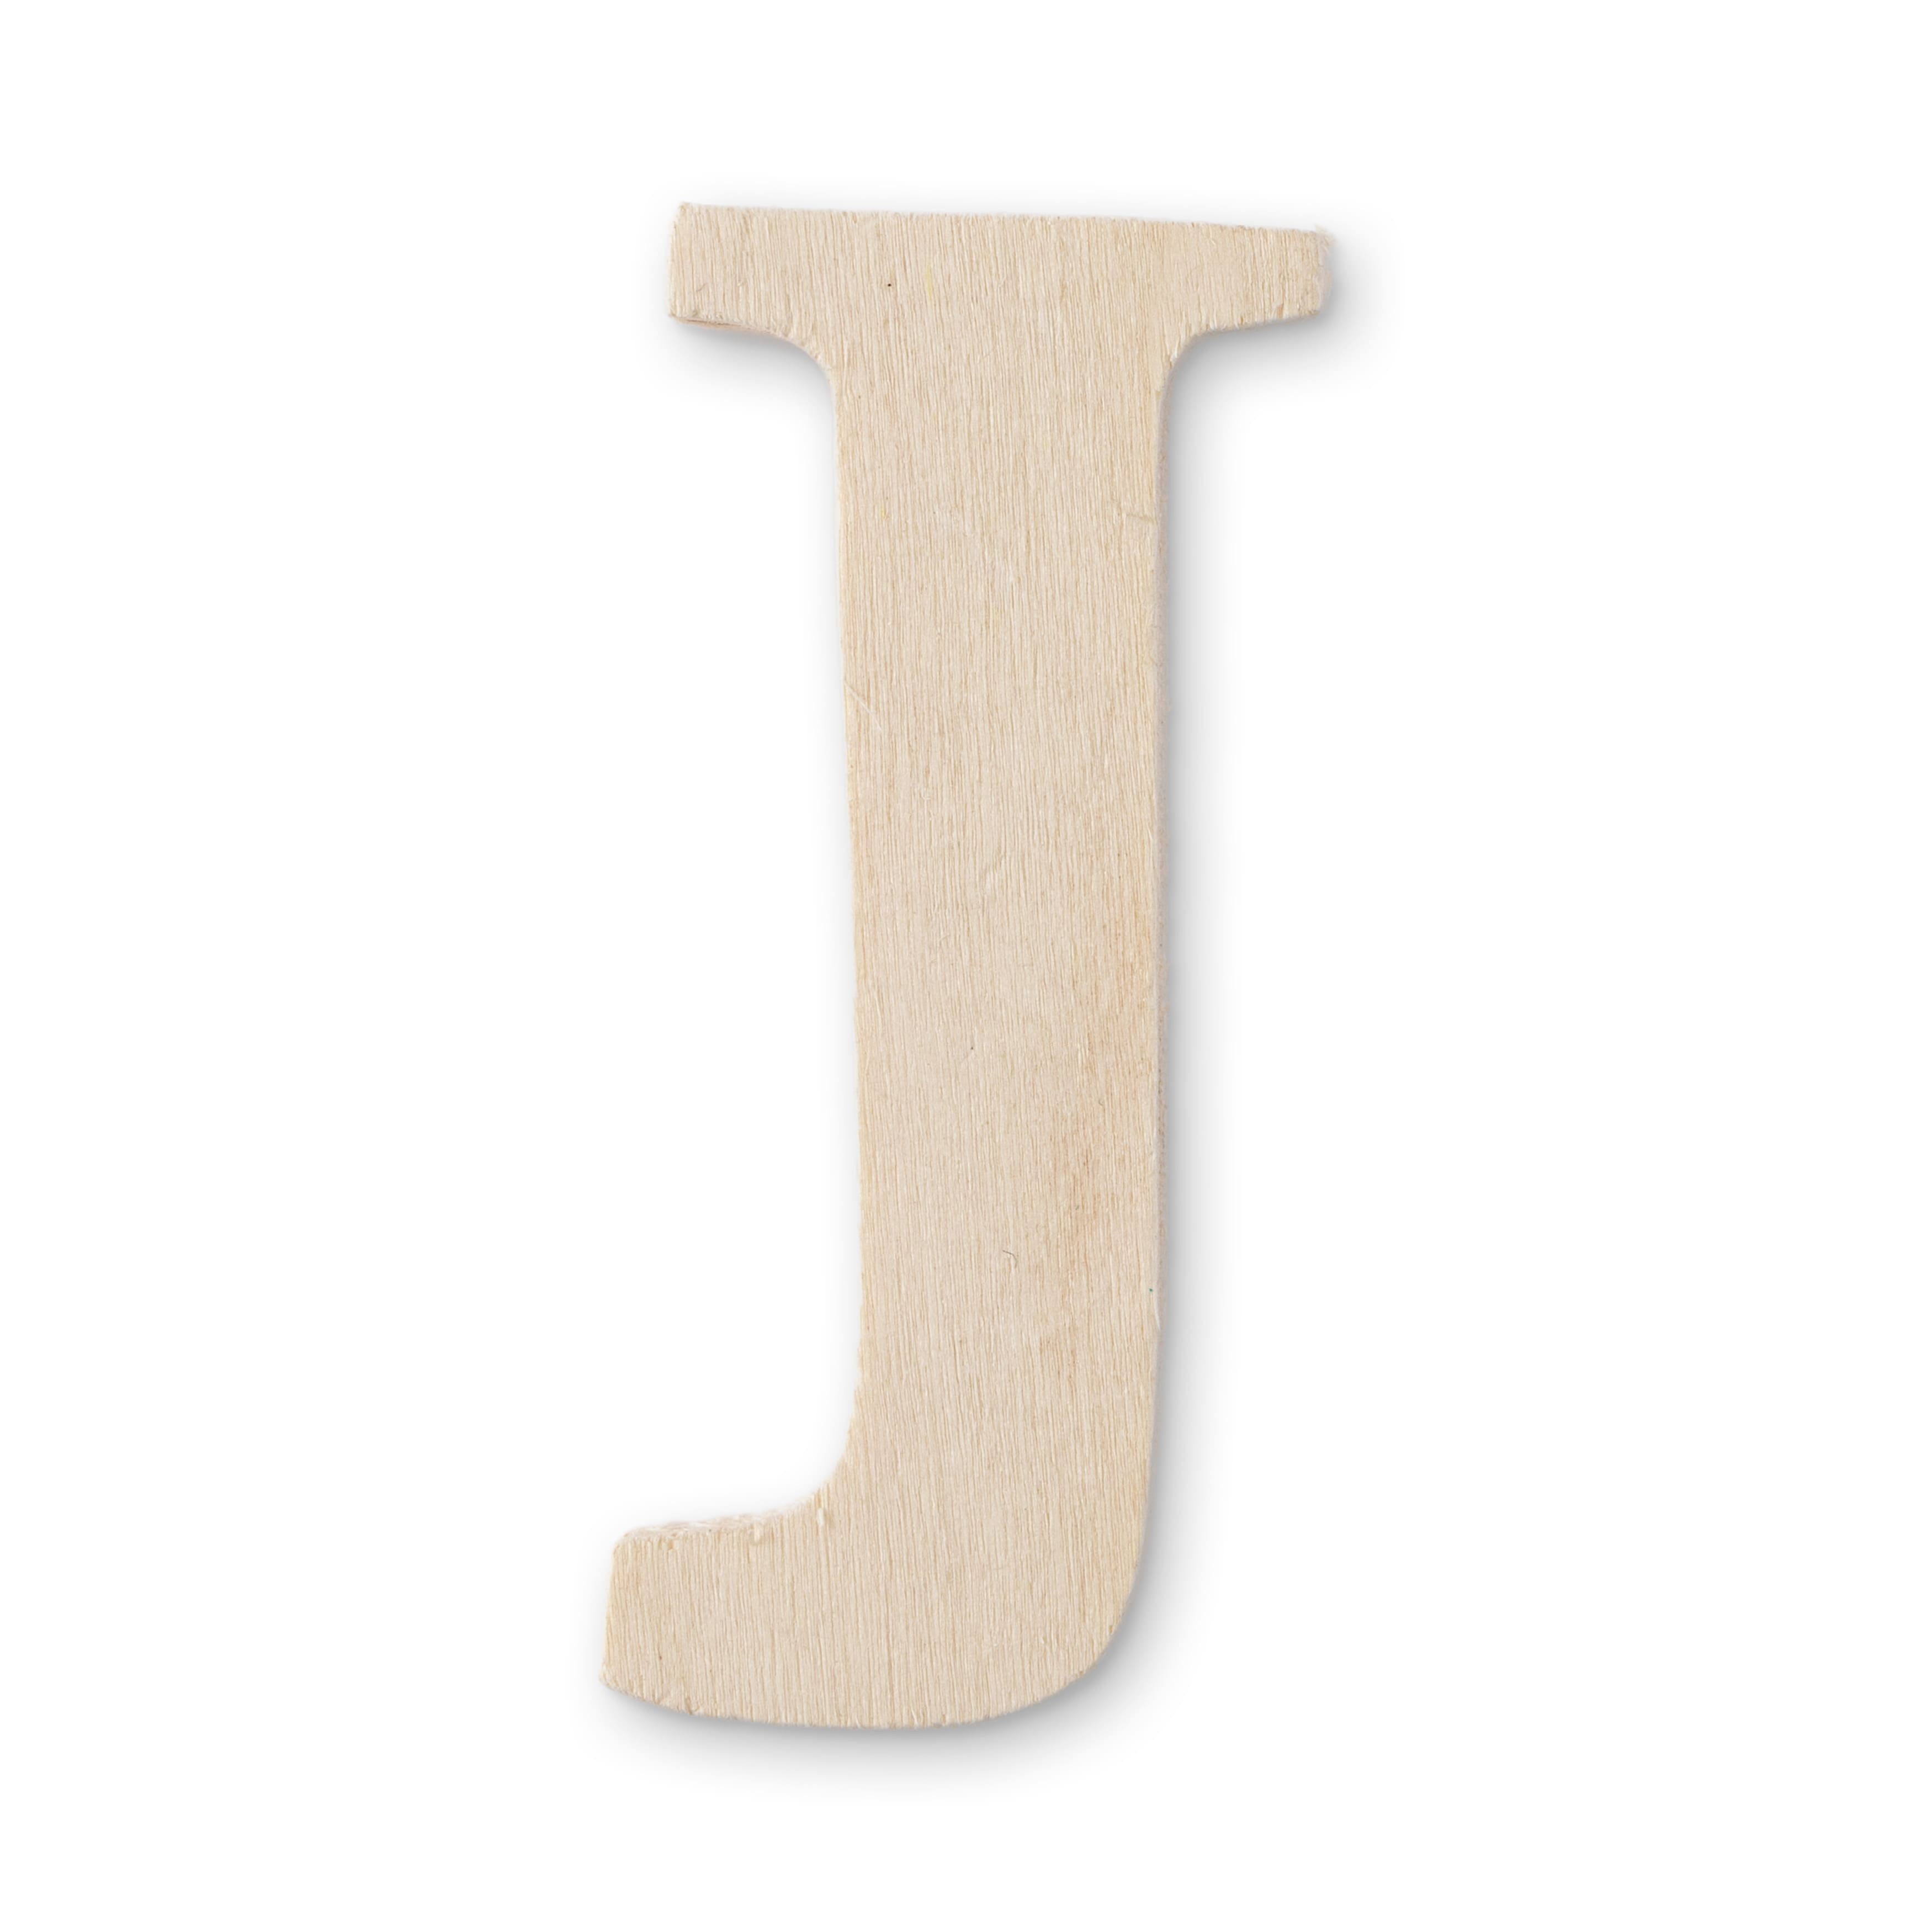 Creativity Street® Letters and Numbers, Natural Wood, 1.5, 200 Pieces